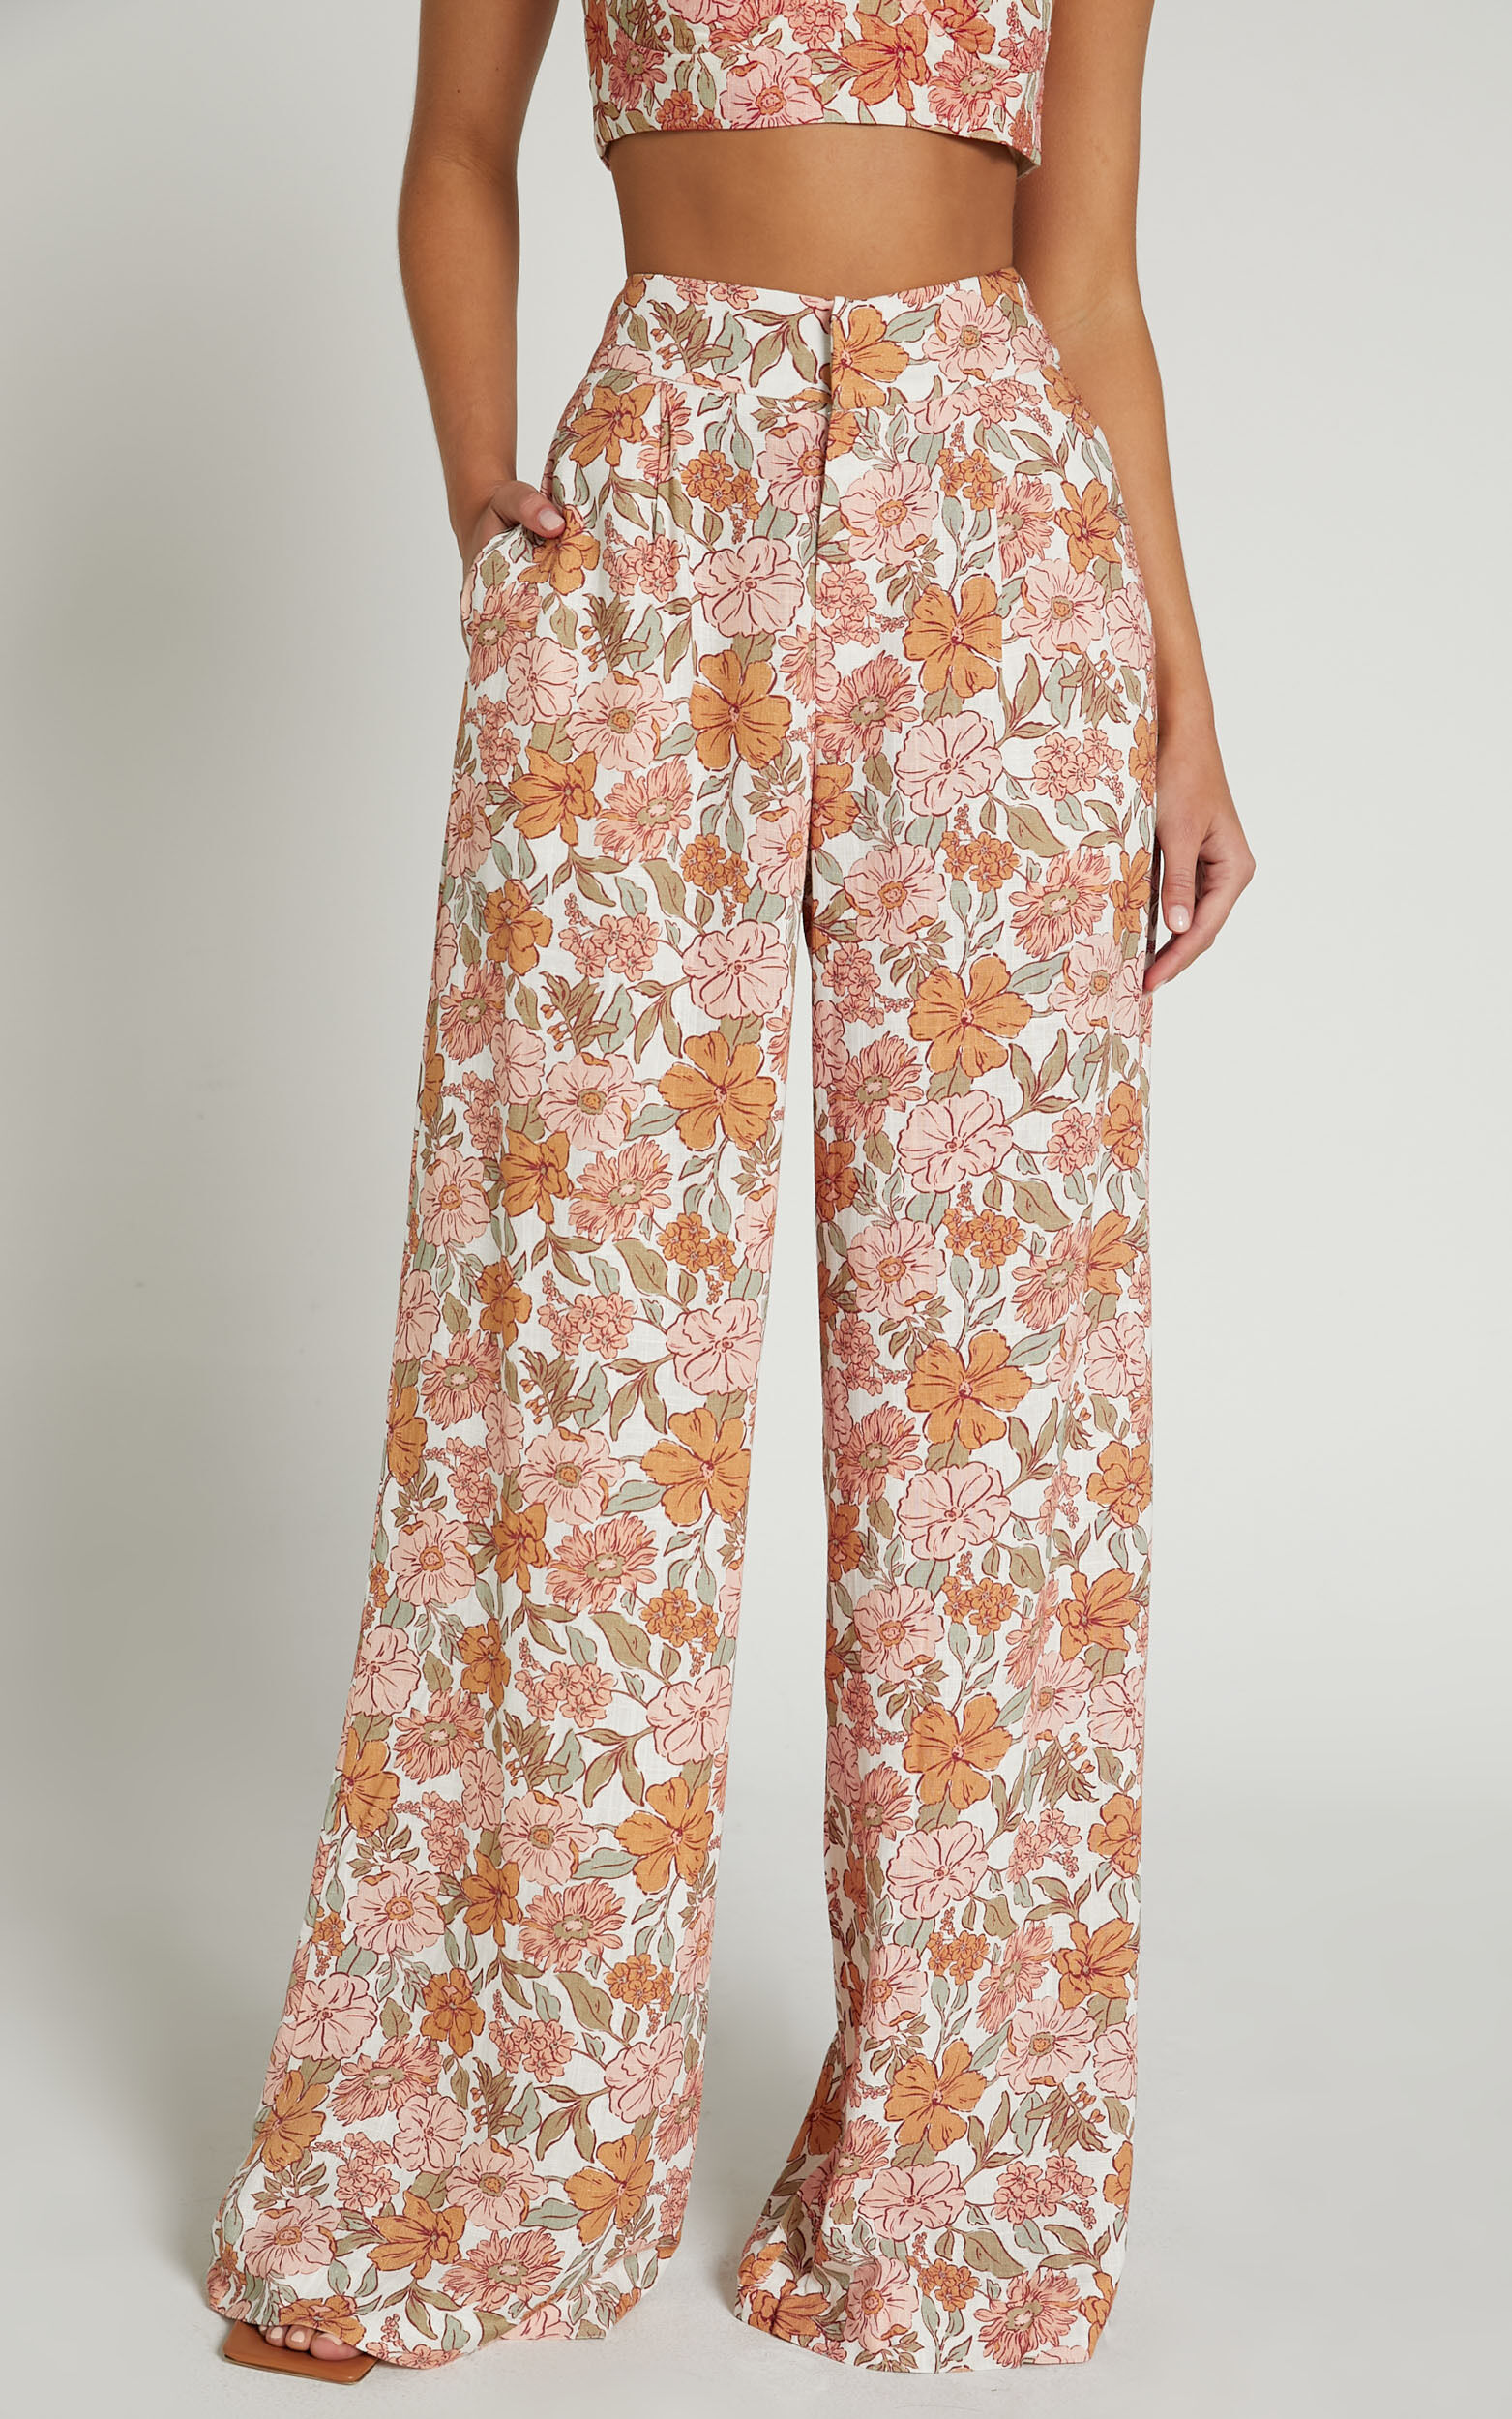 Amalie The Label - Lorete High Rise Wide Leg Pants in Wildflower Floral ...